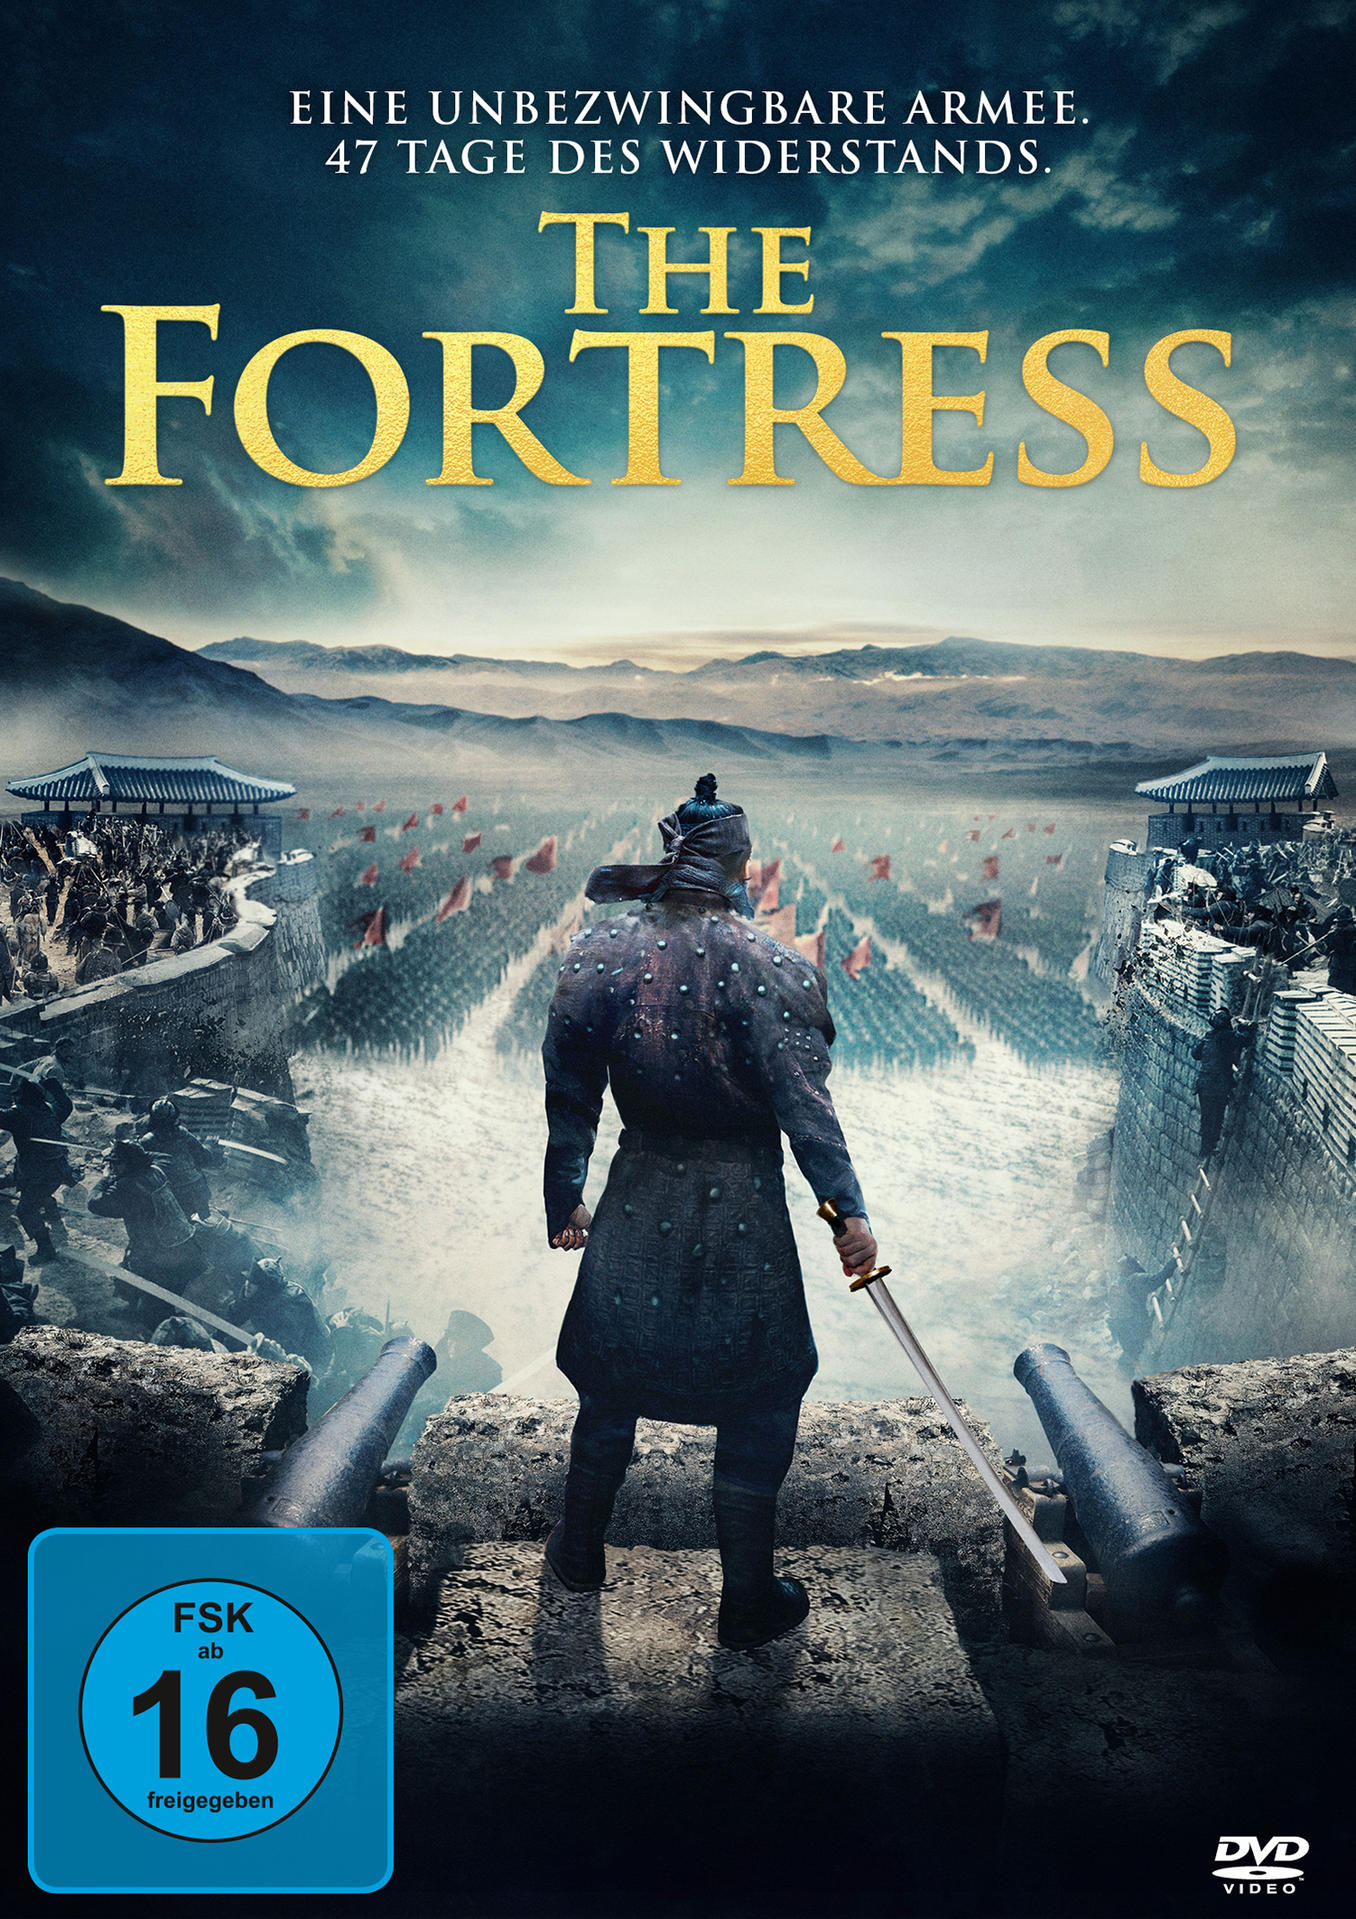 The Fortress DVD